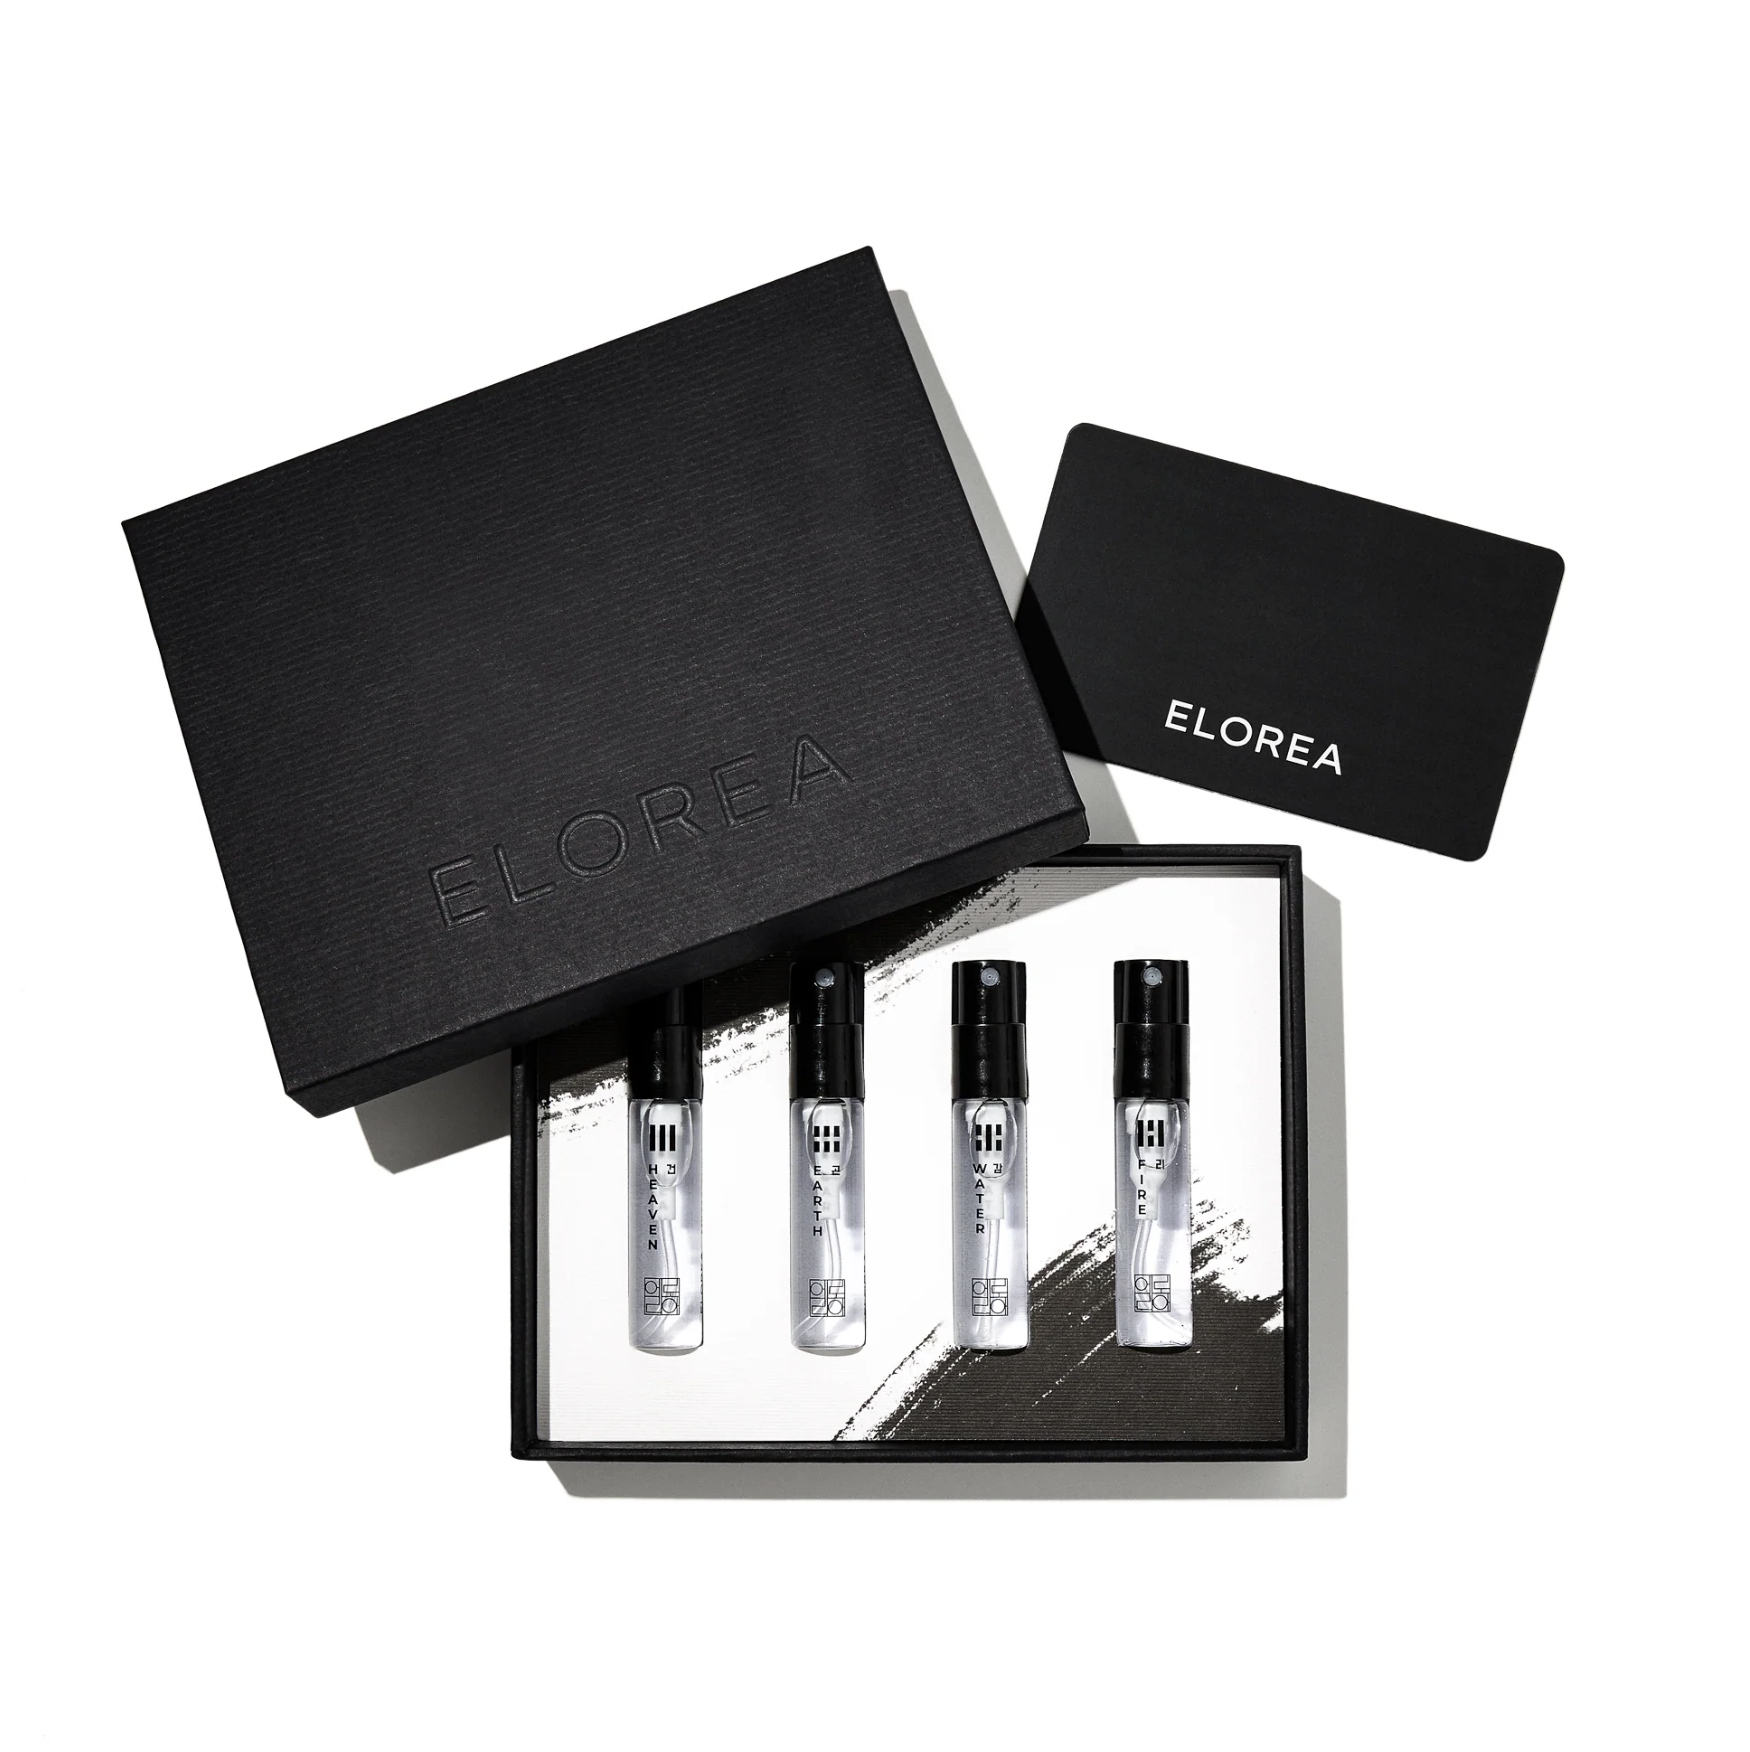 The Elements Discovery Set with four perfume samples